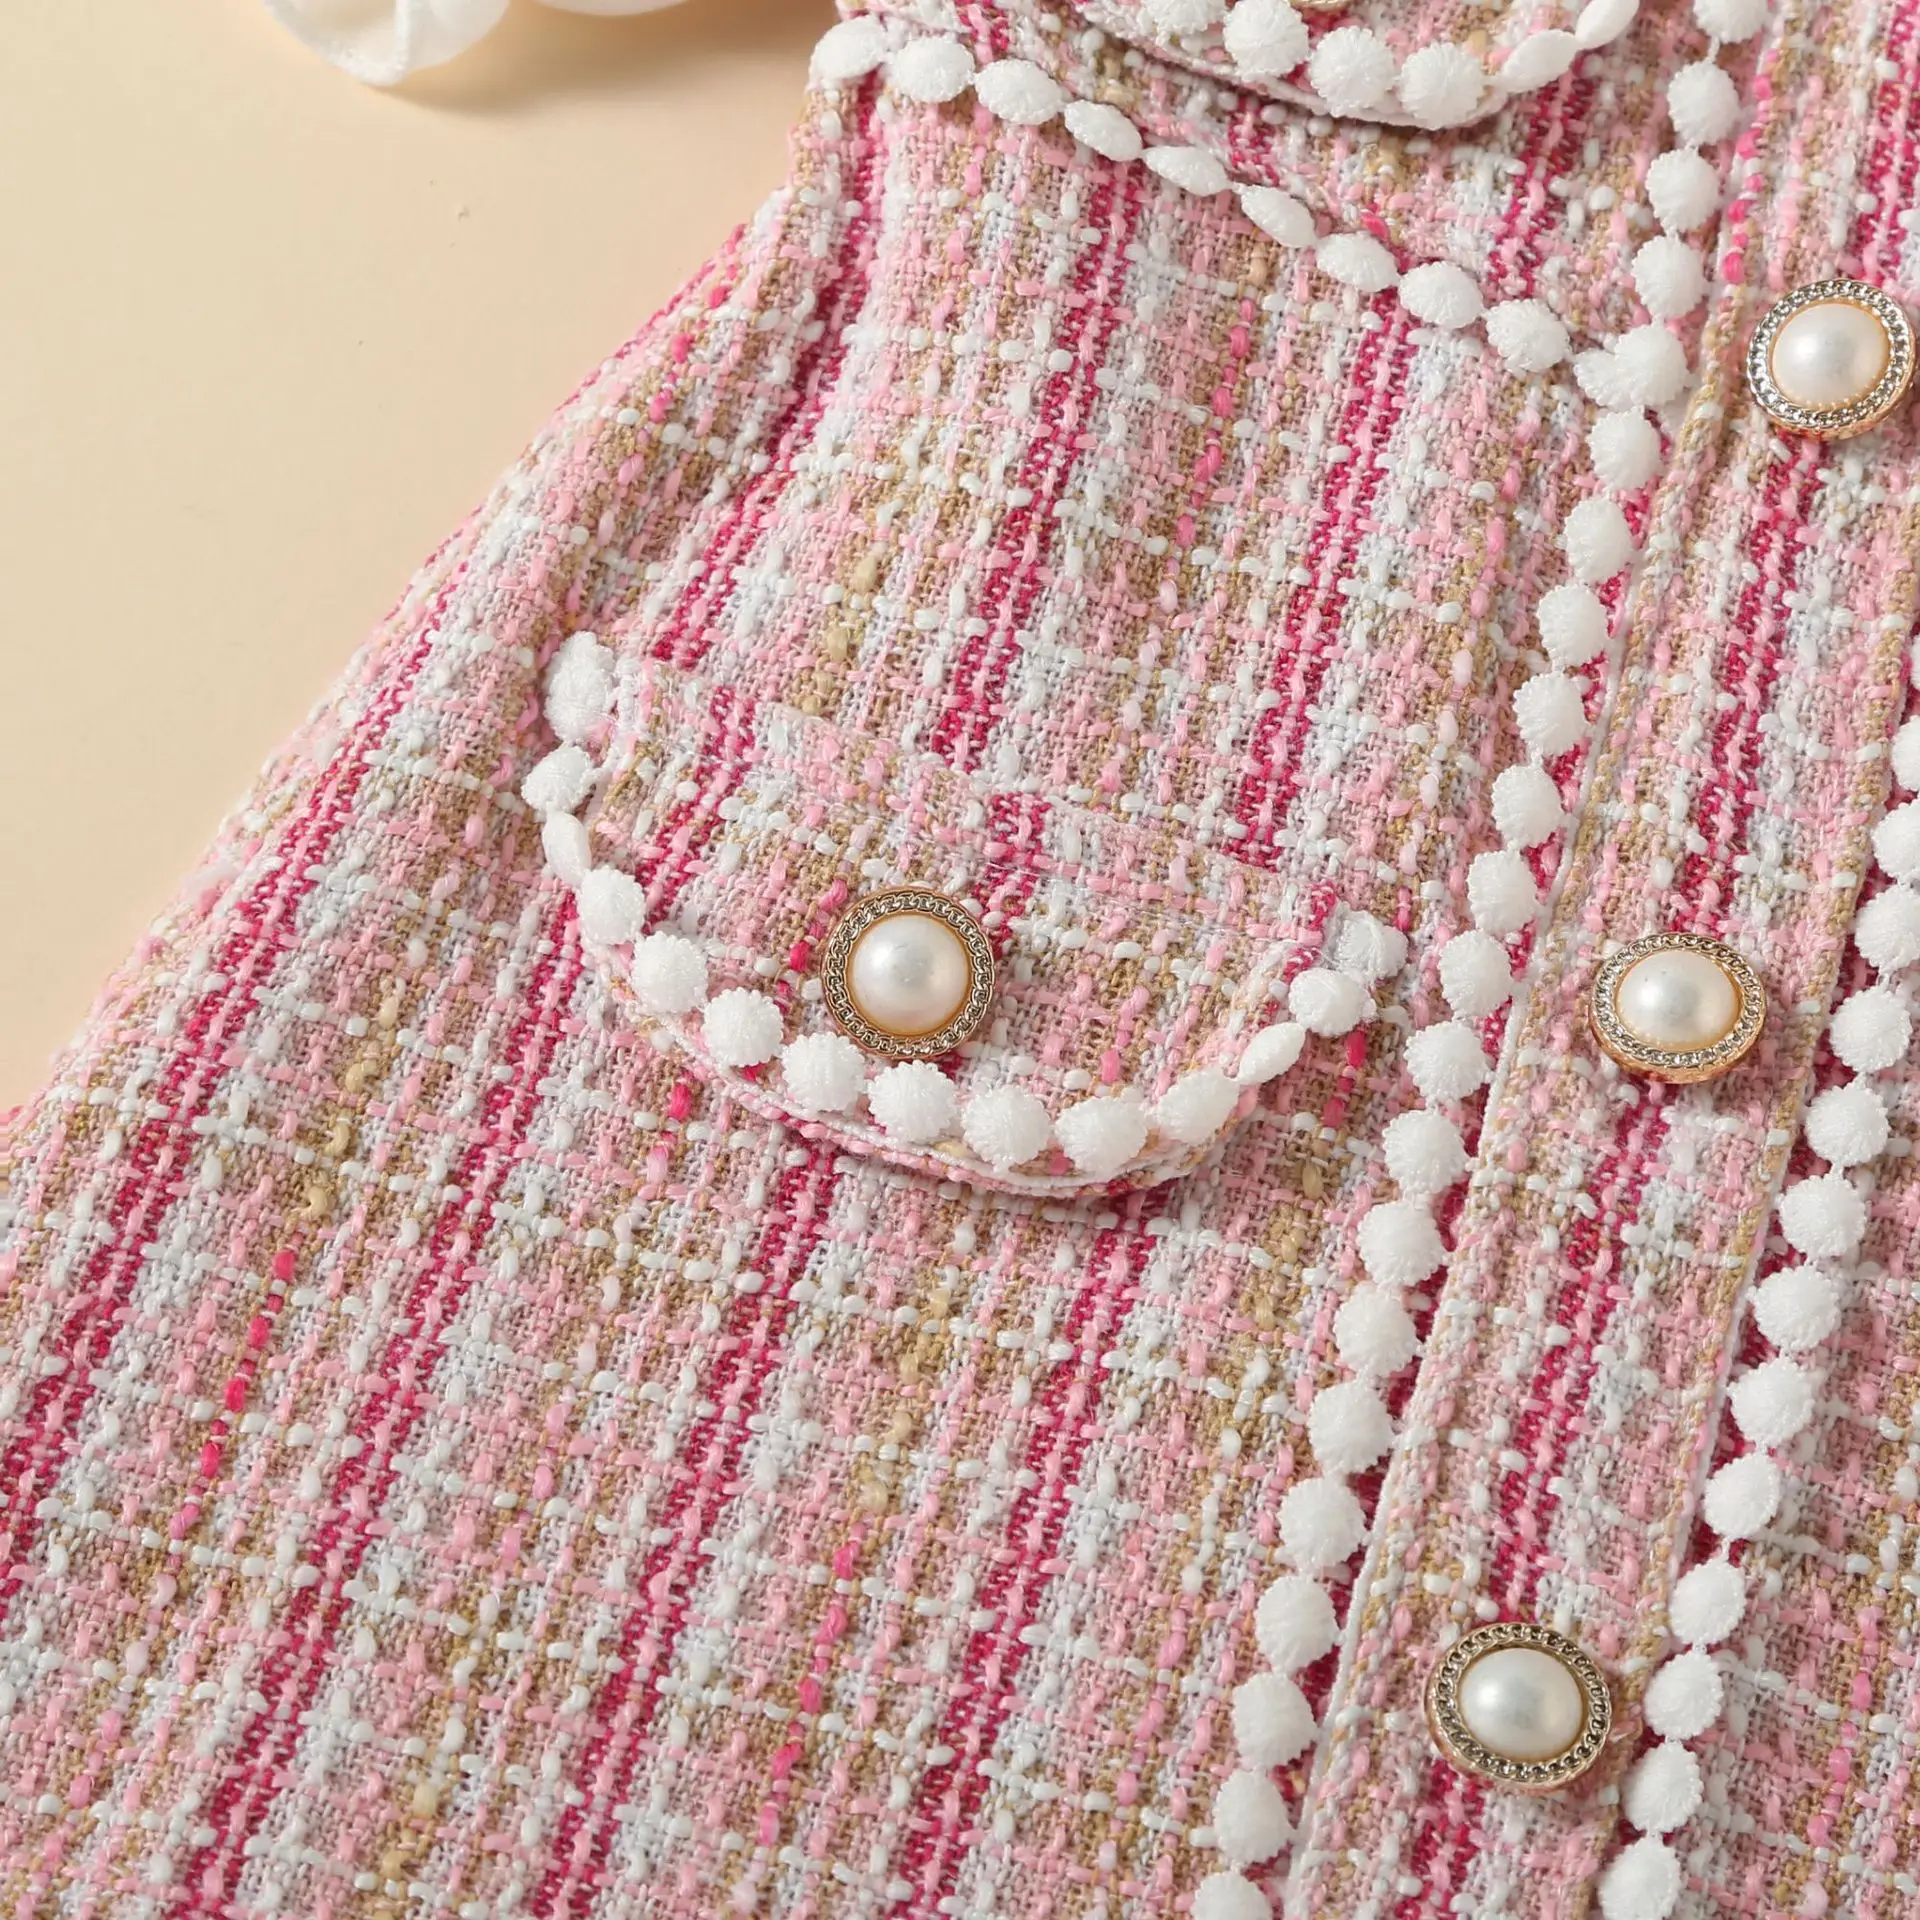 Summer 80 to 140cm Girl Clothes Set Plaid Pink Dress With Pearl Luxury 2-9 Years Puff Sleeves Square Collar Girls Dresses